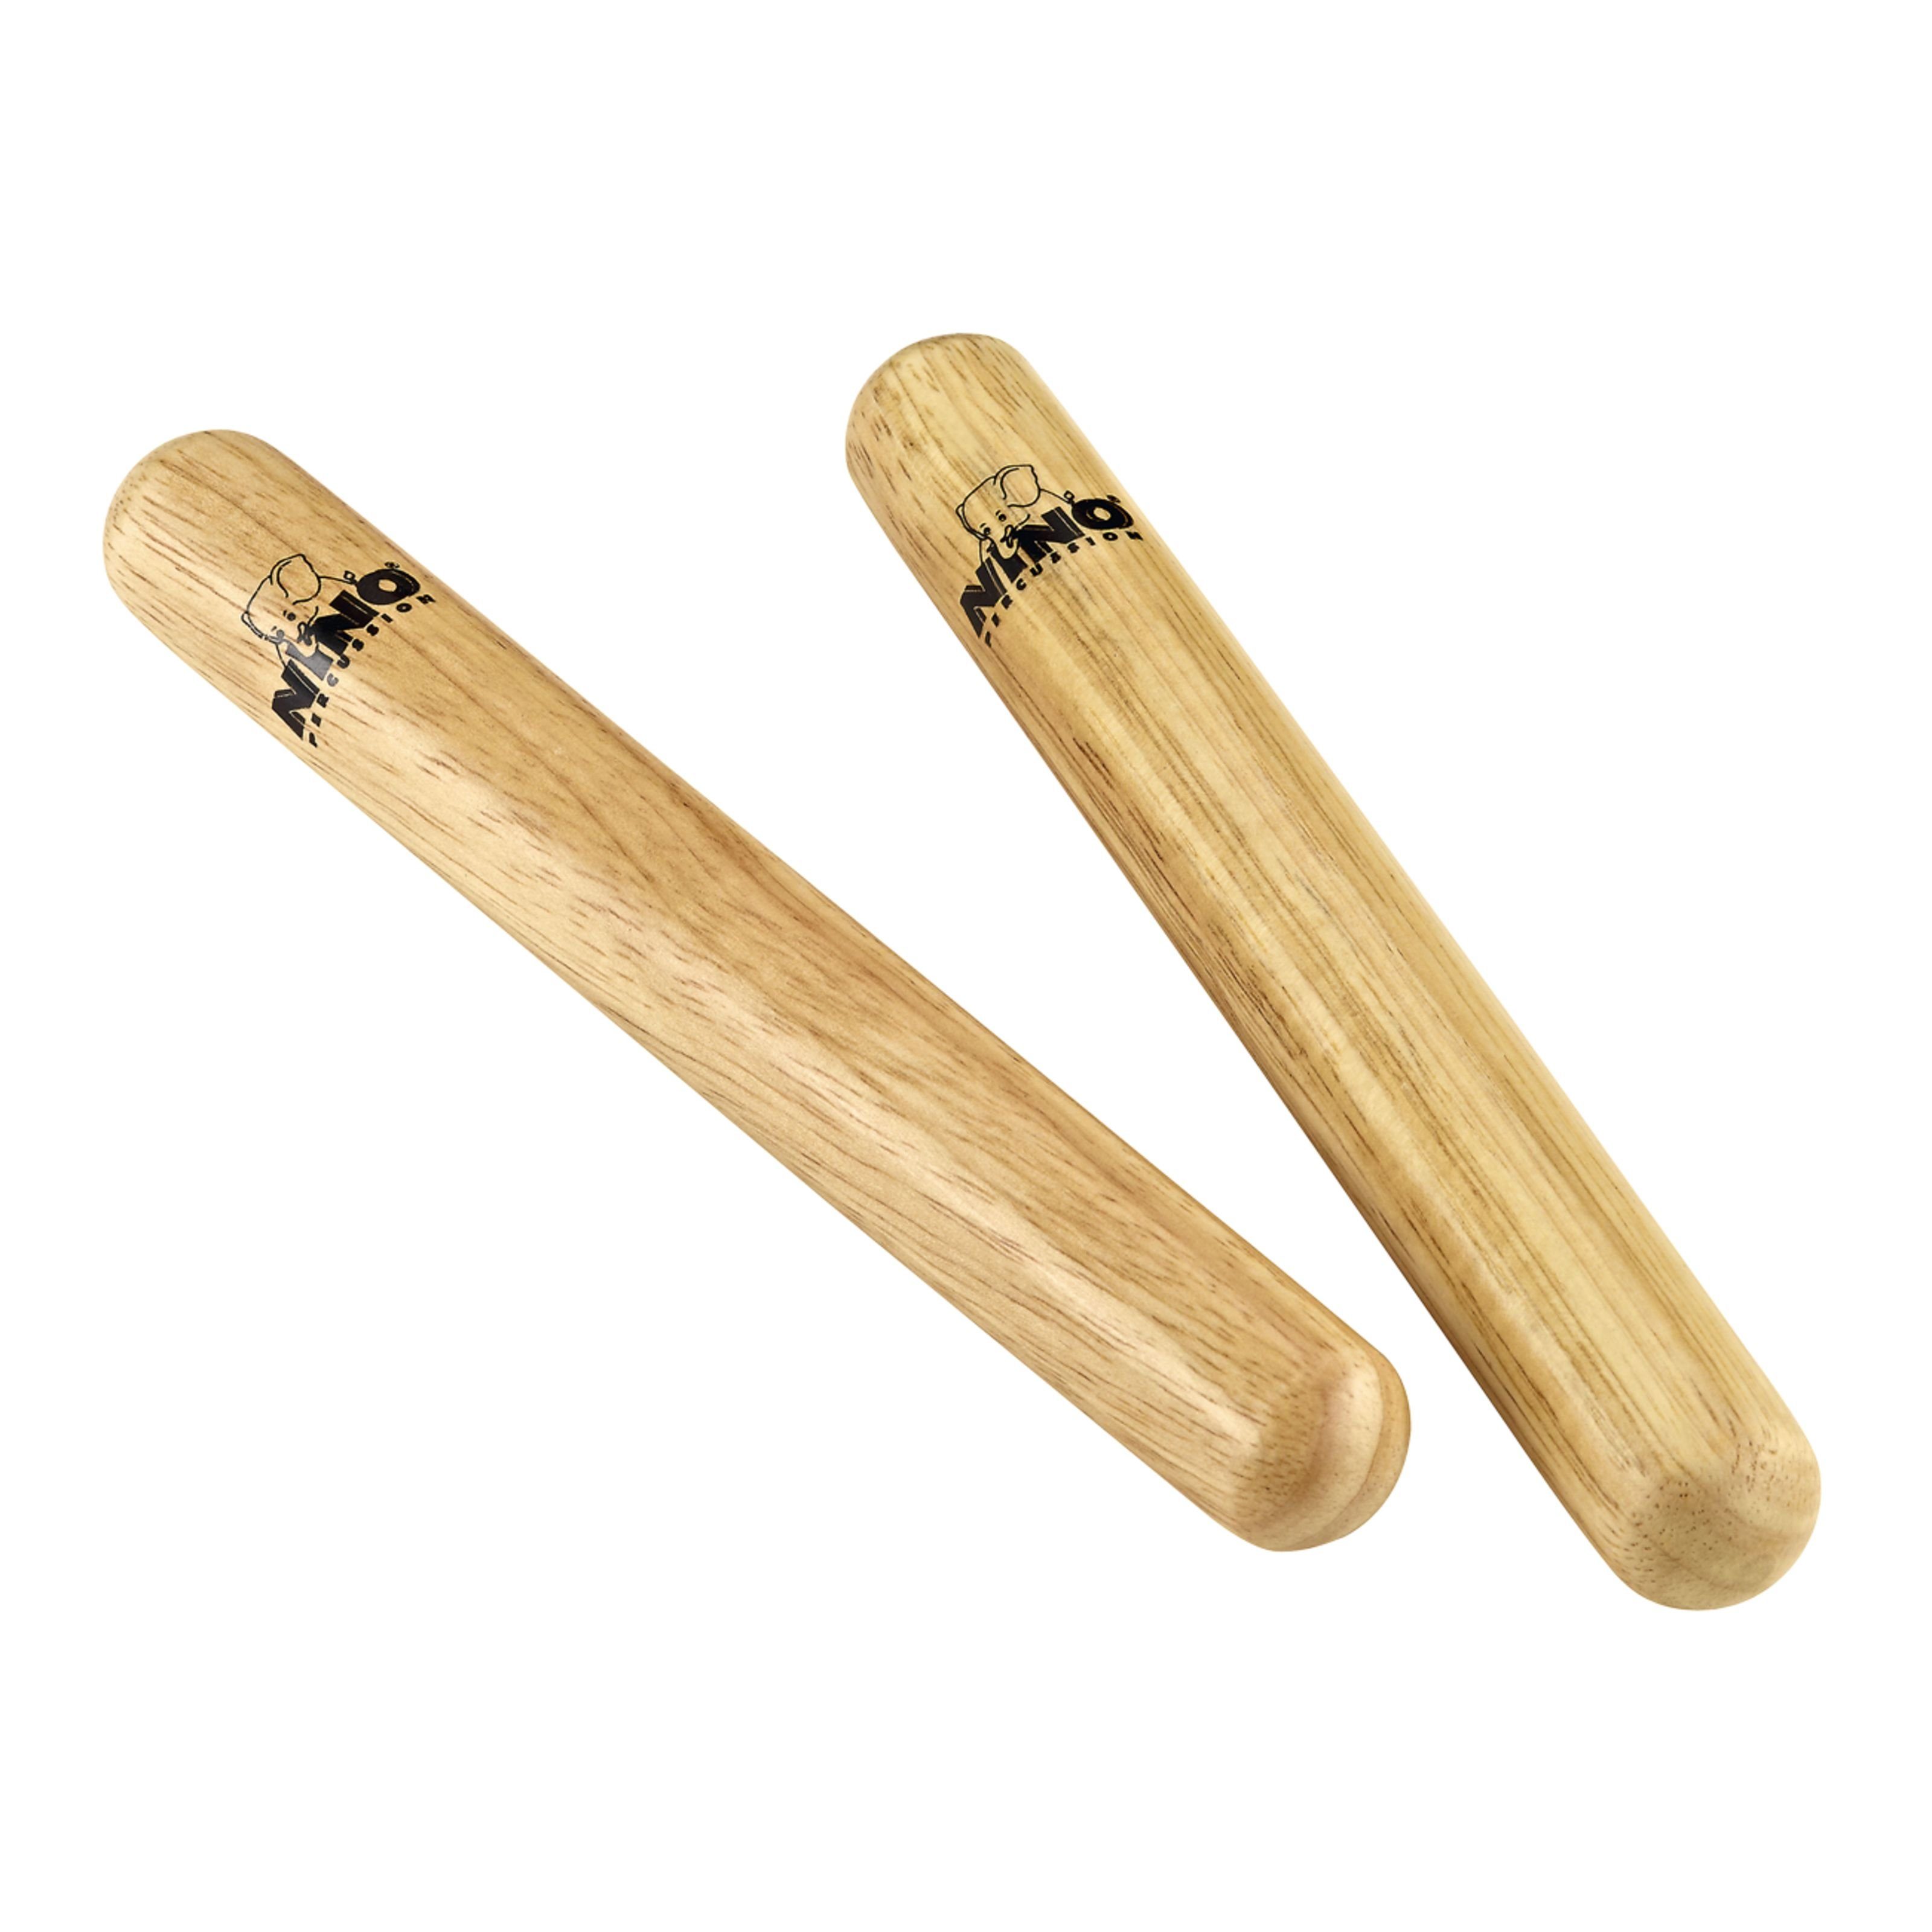 Meinl Percussion Spielzeug-Musikinstrument, Claves NINO502, small - Claves